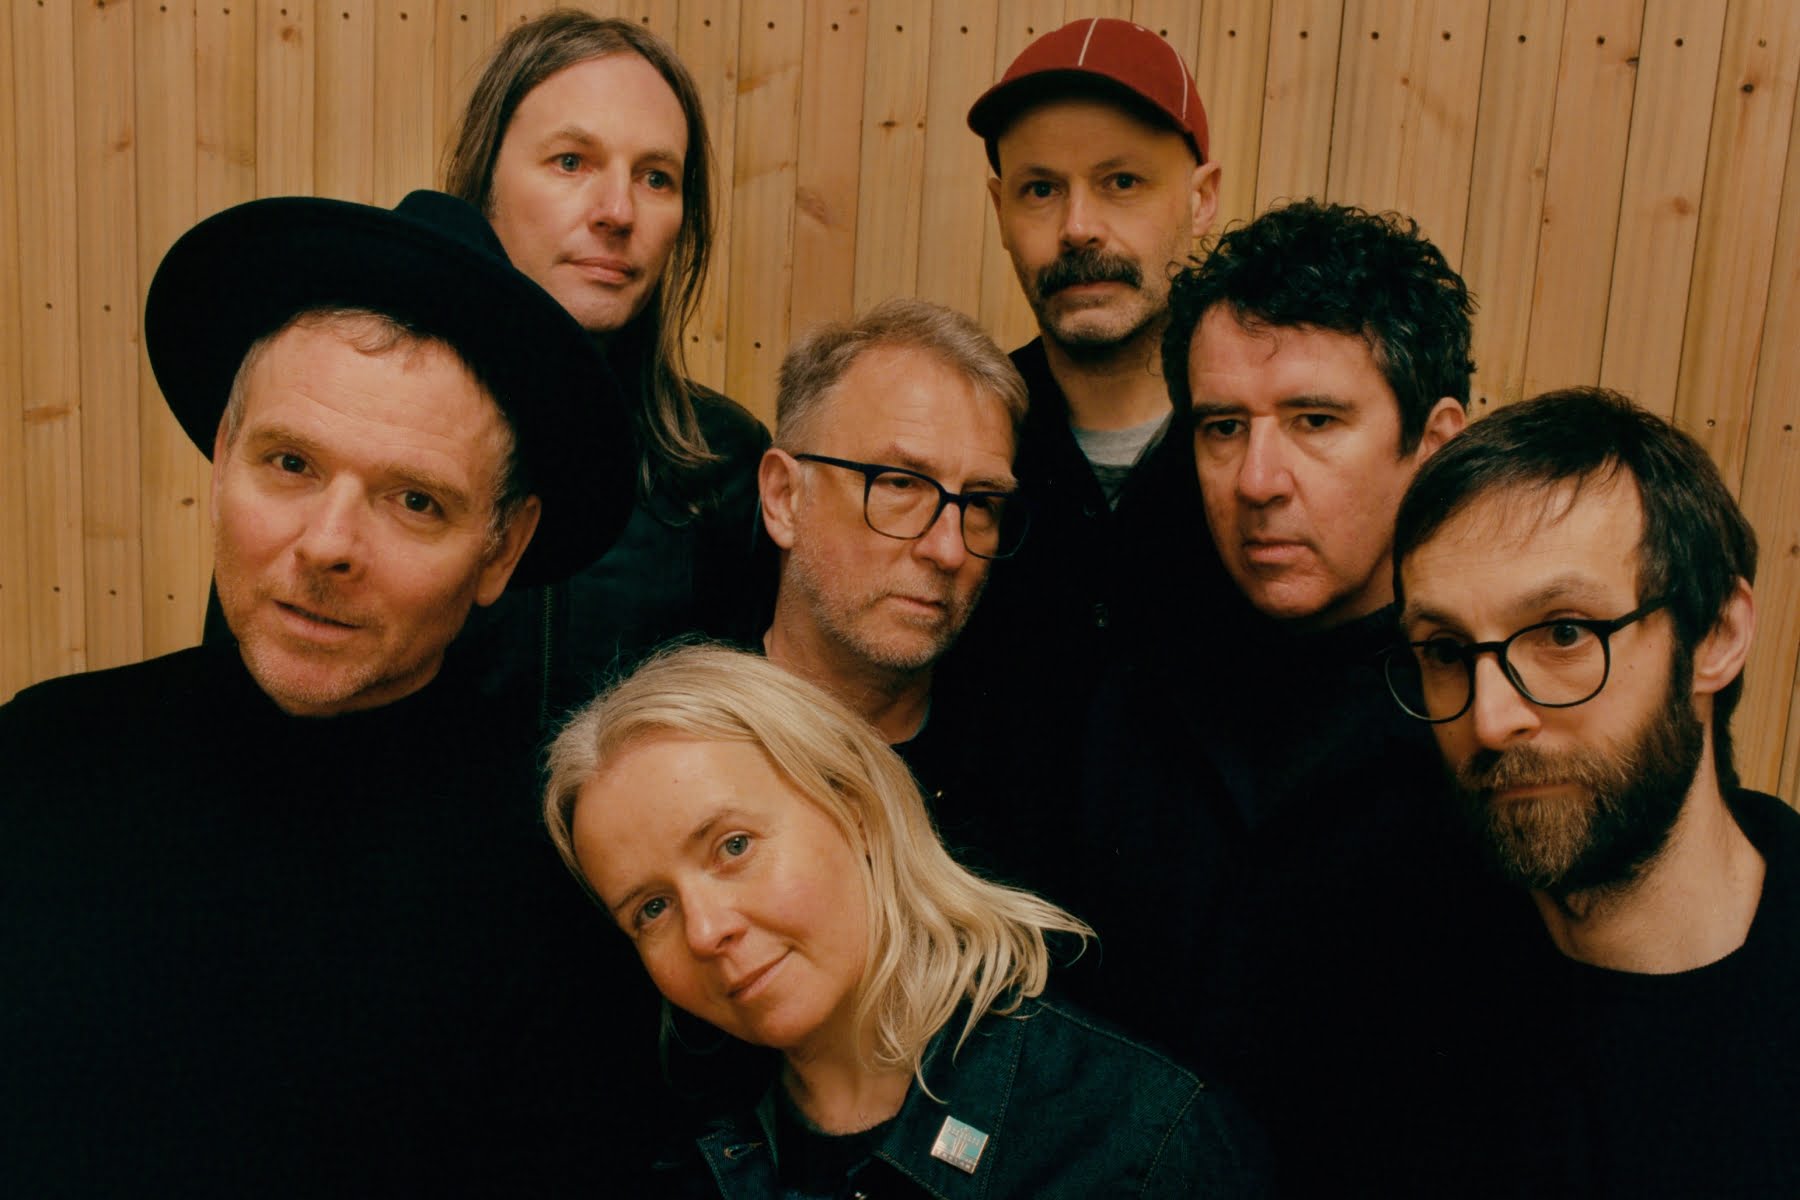 Belle and Sebastian enlist London teenagers to direct the video for "Talk To Me Talk To Me."